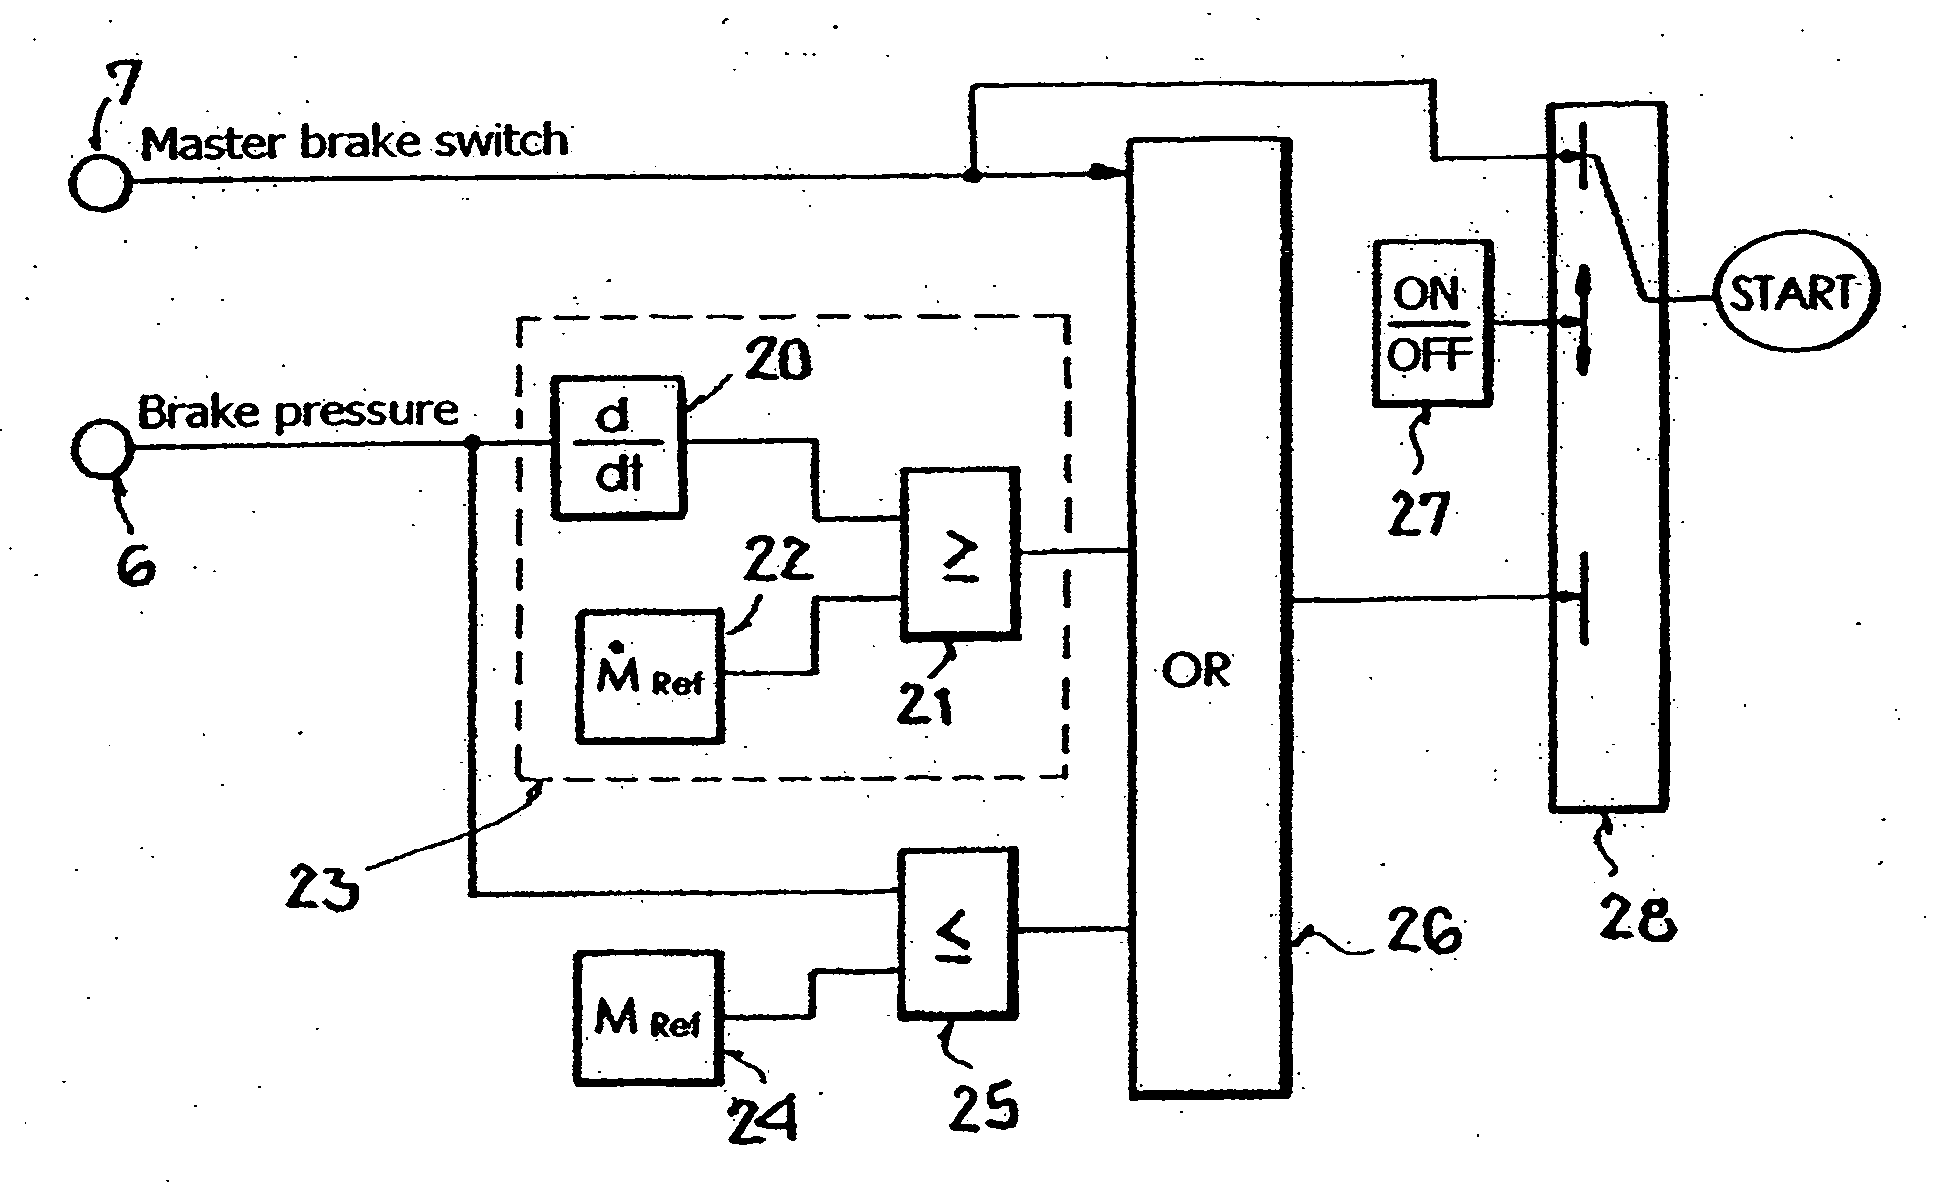 Method for automatically starting an internal combustion engine